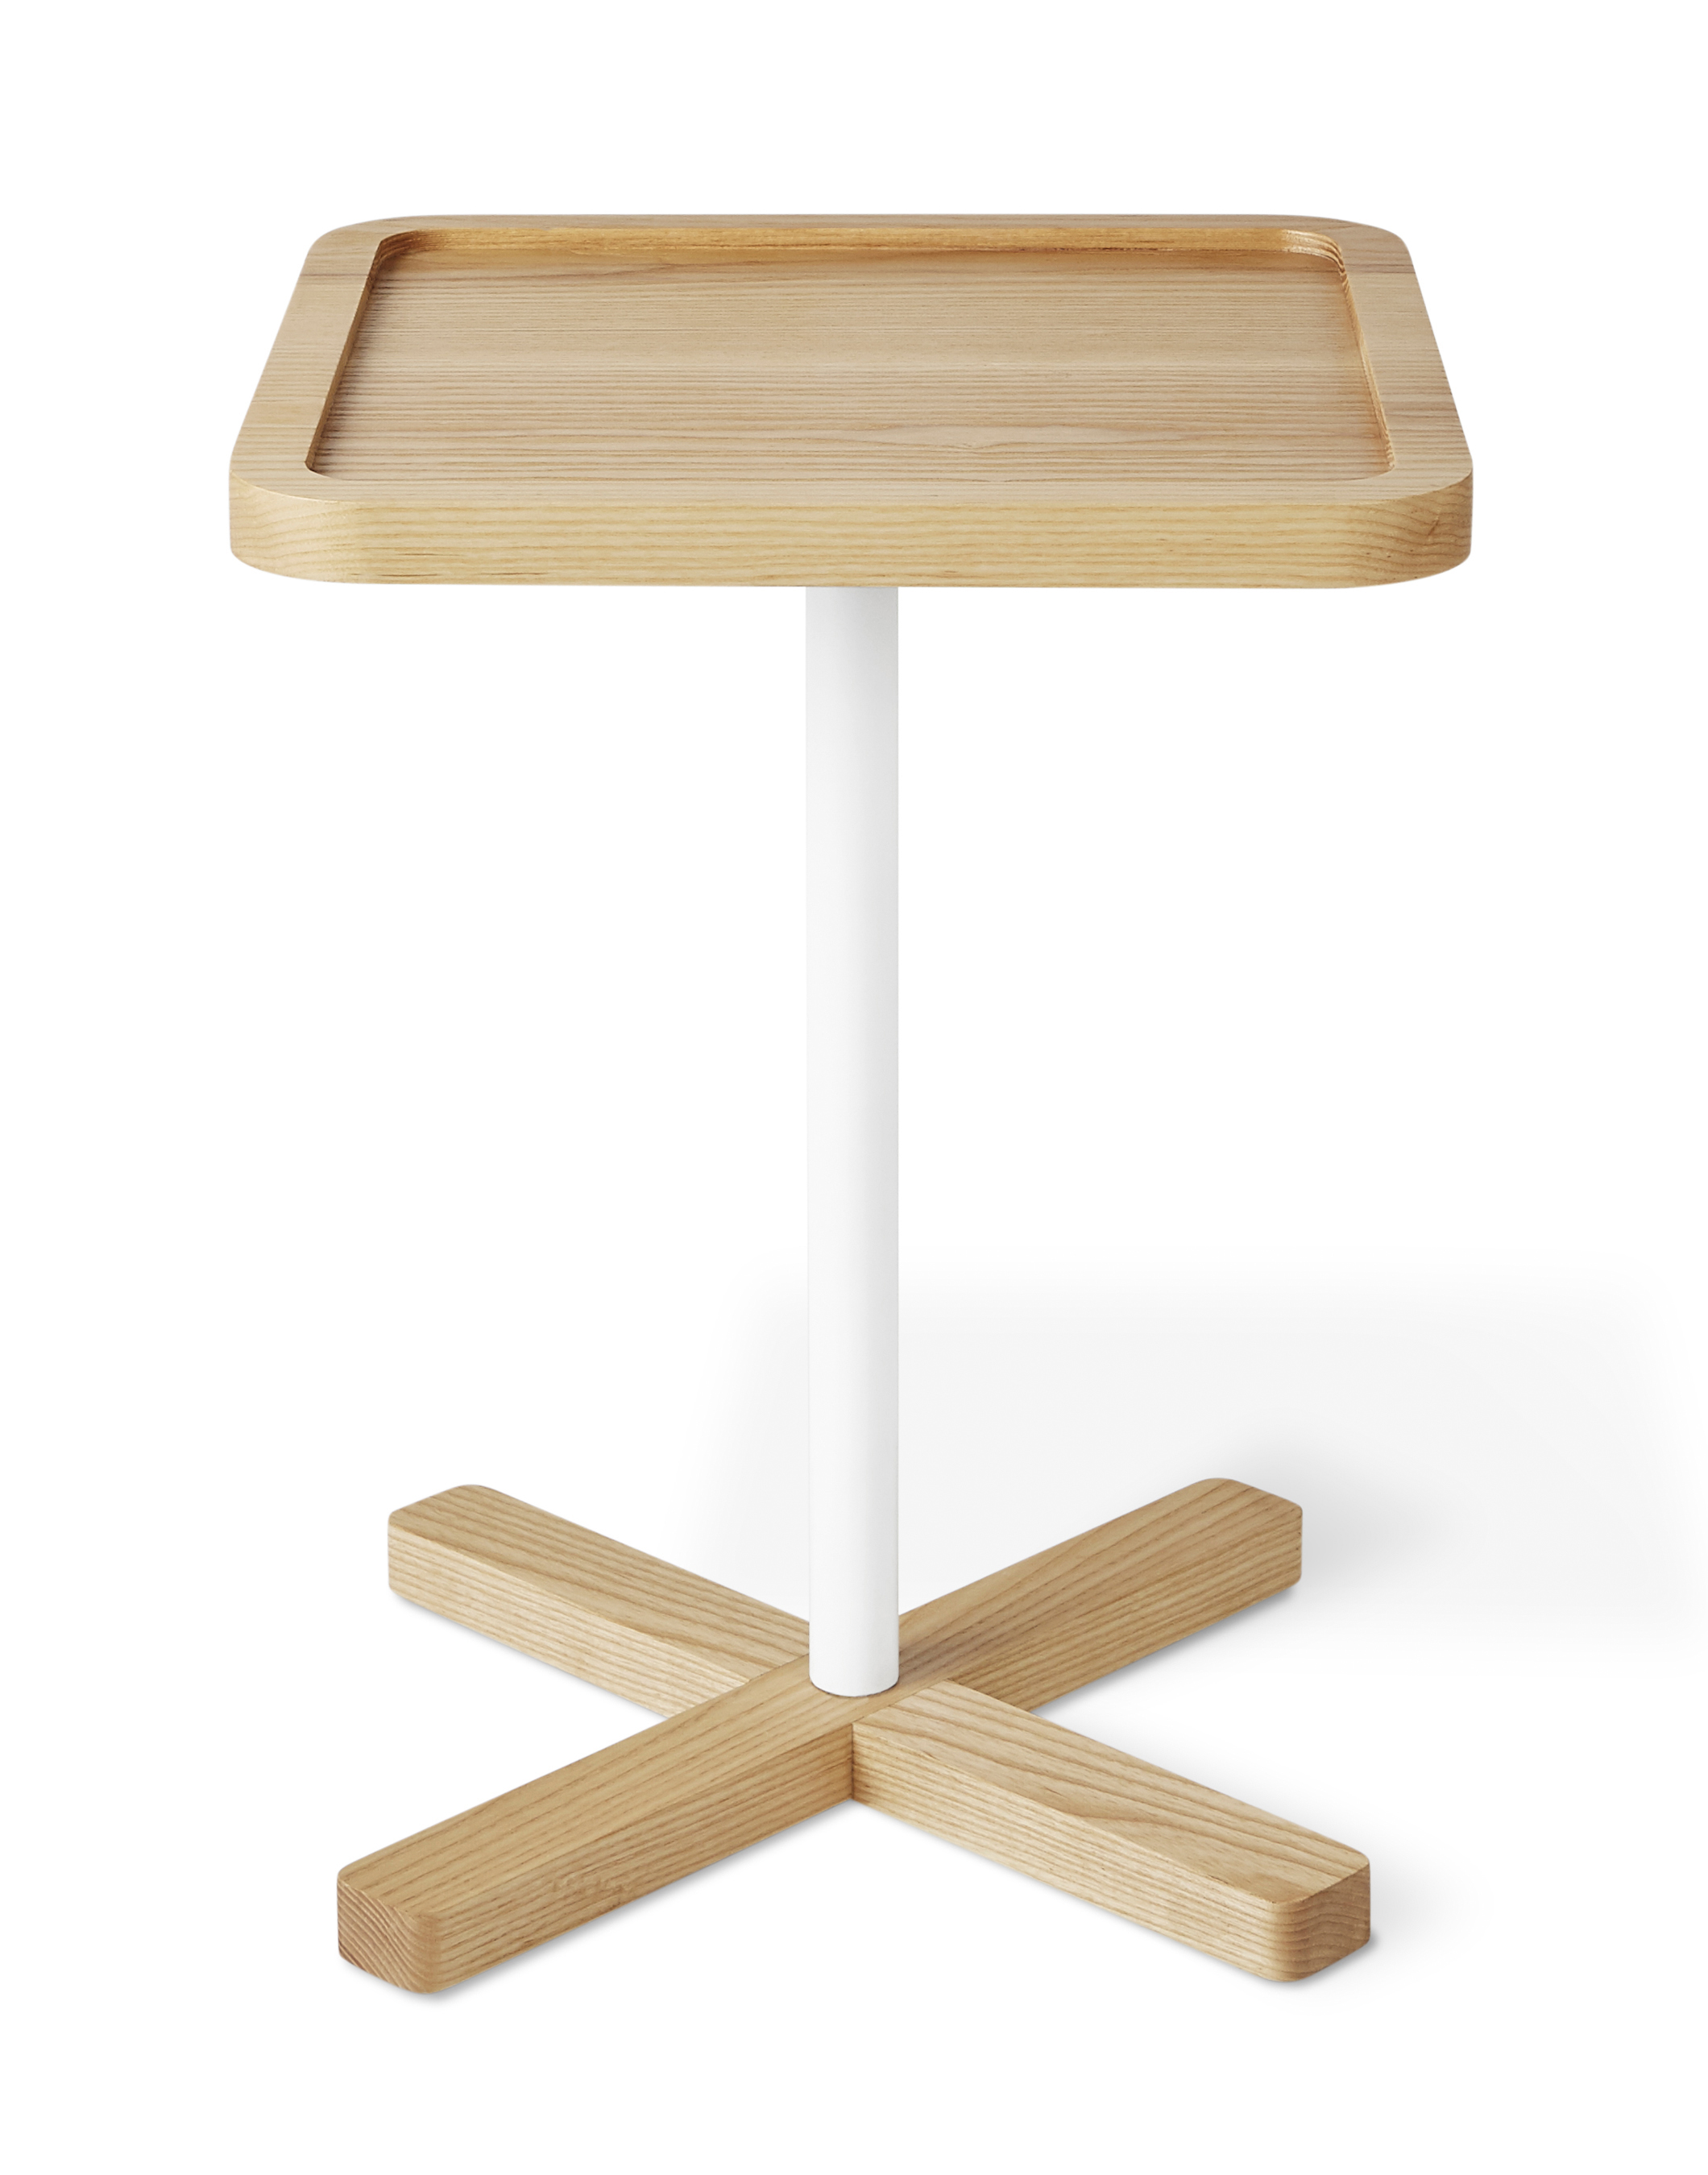 Gus Design Group Axis end table